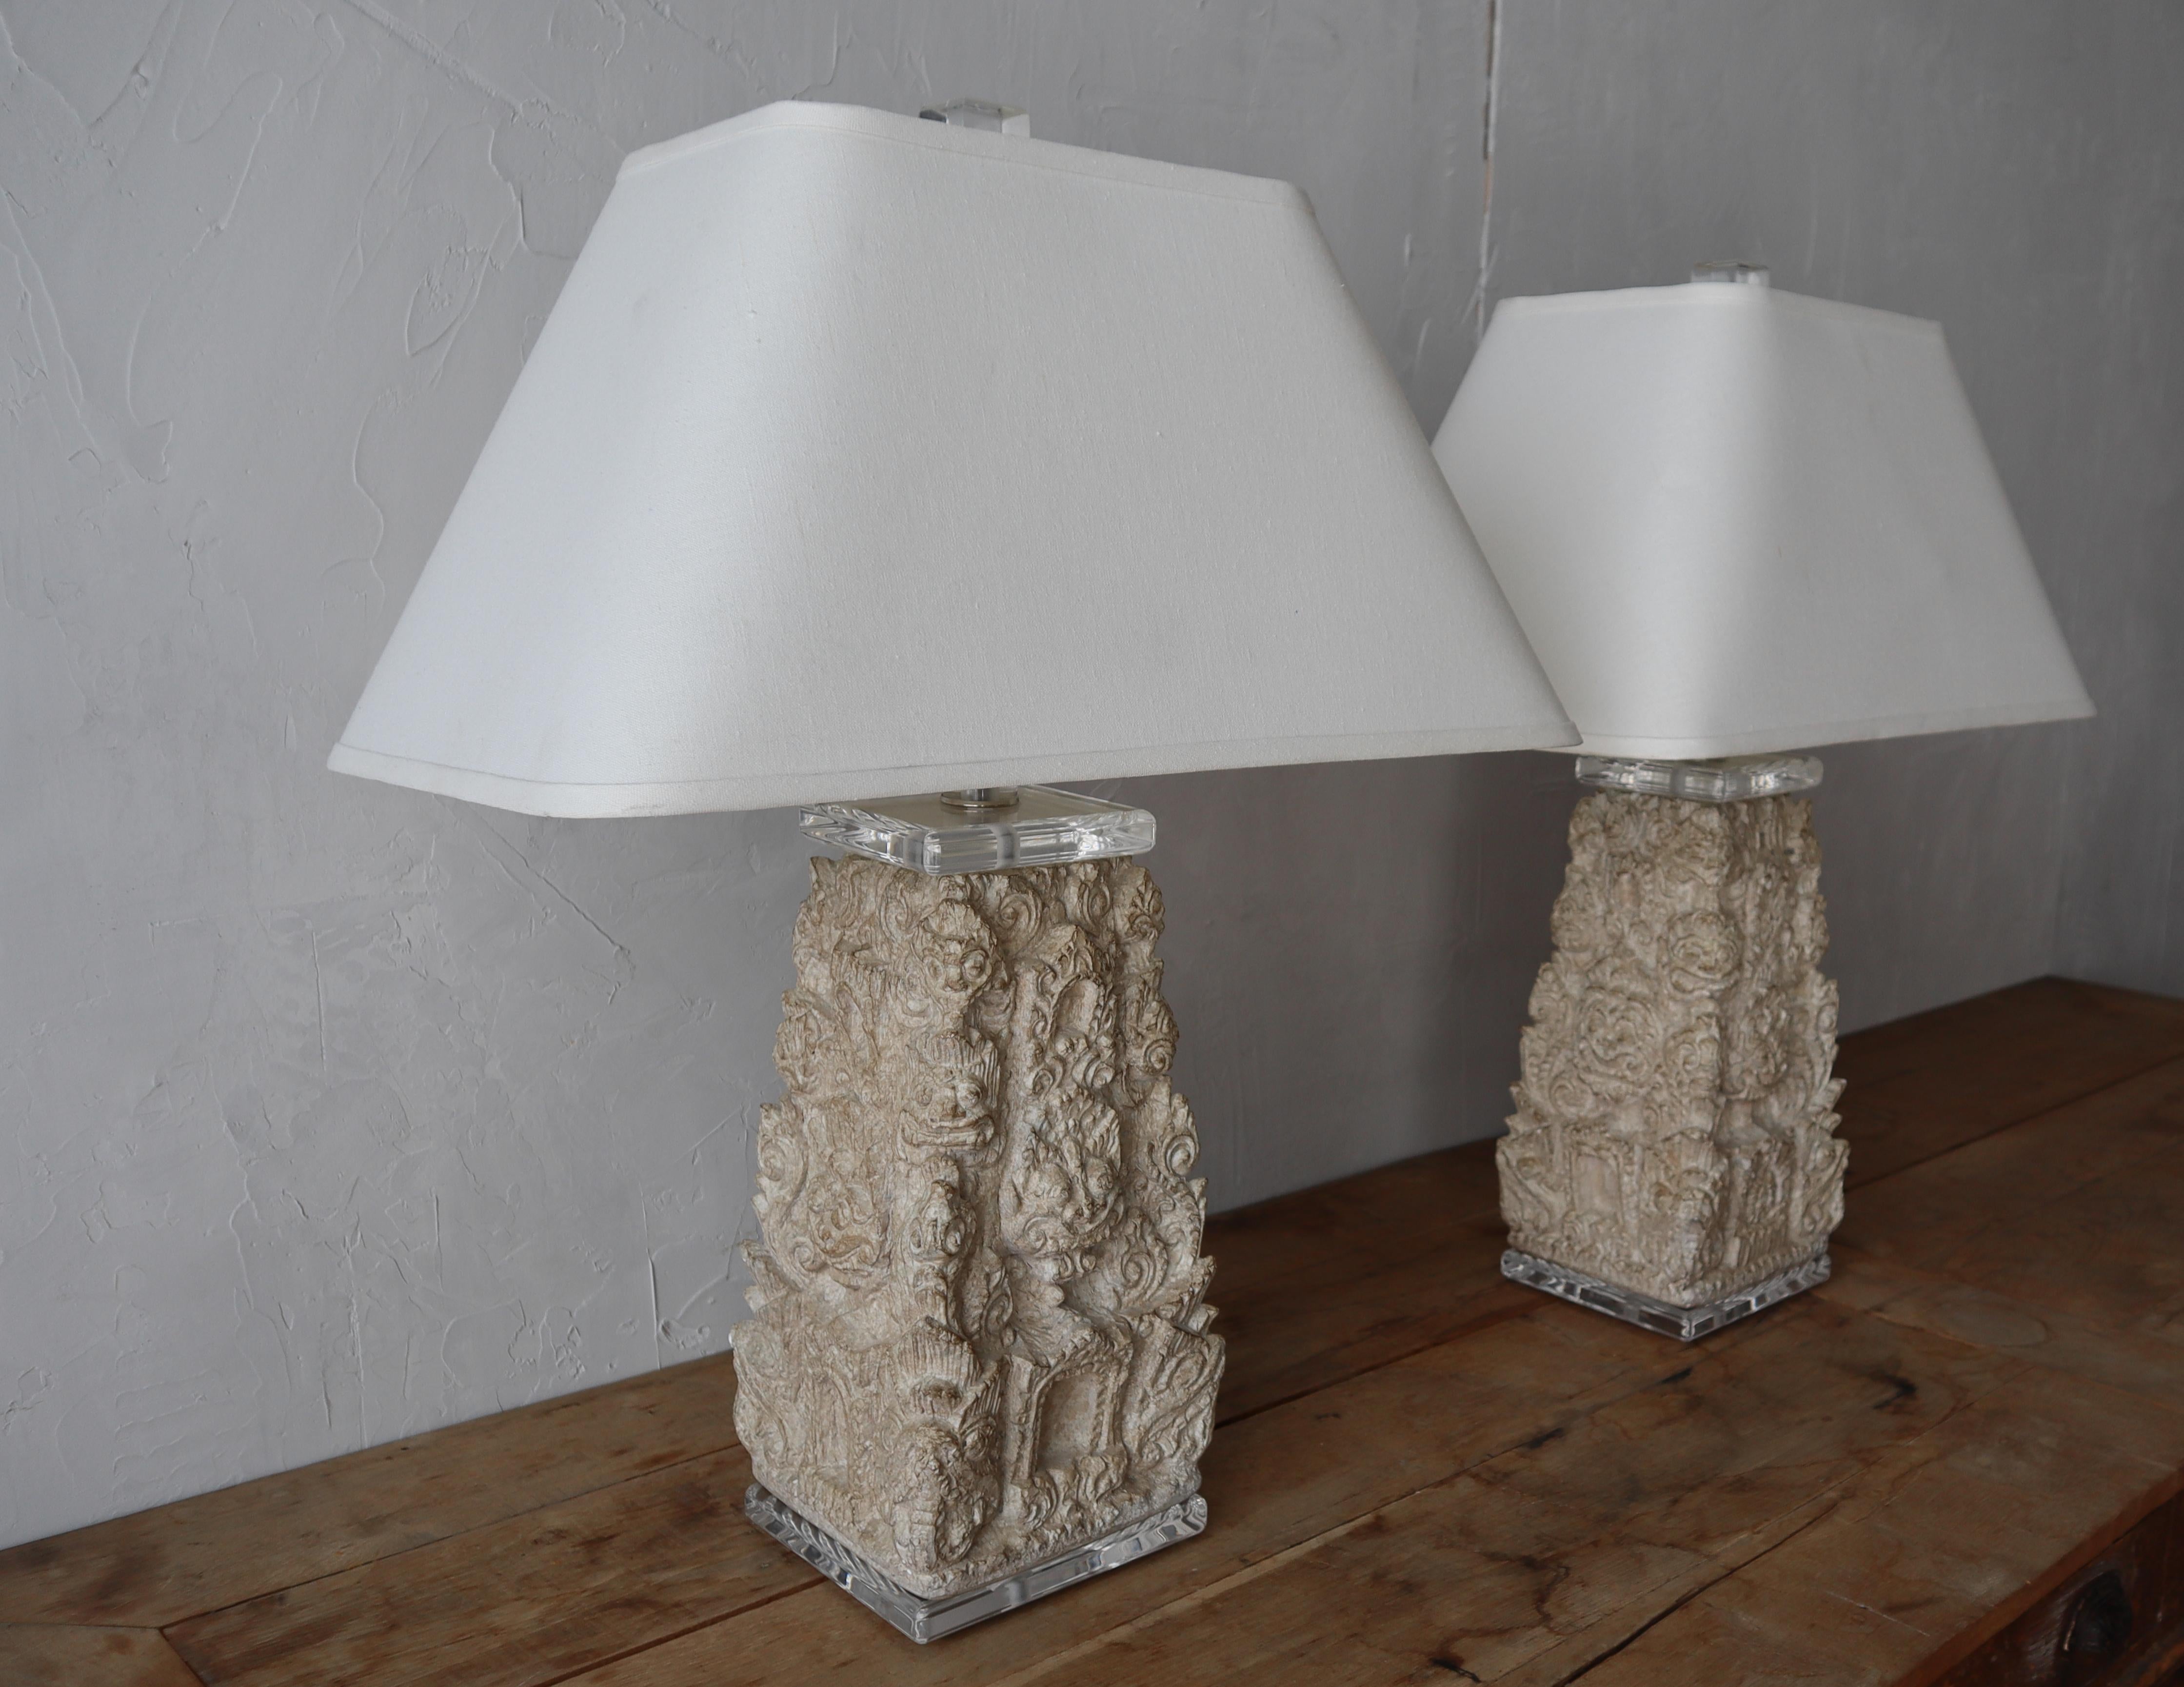 This pair of carved stone and lucite Foo Dog lamps is nothing short of incredible. These lamps are fairly large and heavy. The carved details and lucite accents add lots of depth and texture.

Lamps are in excellent condition with no chips cracks